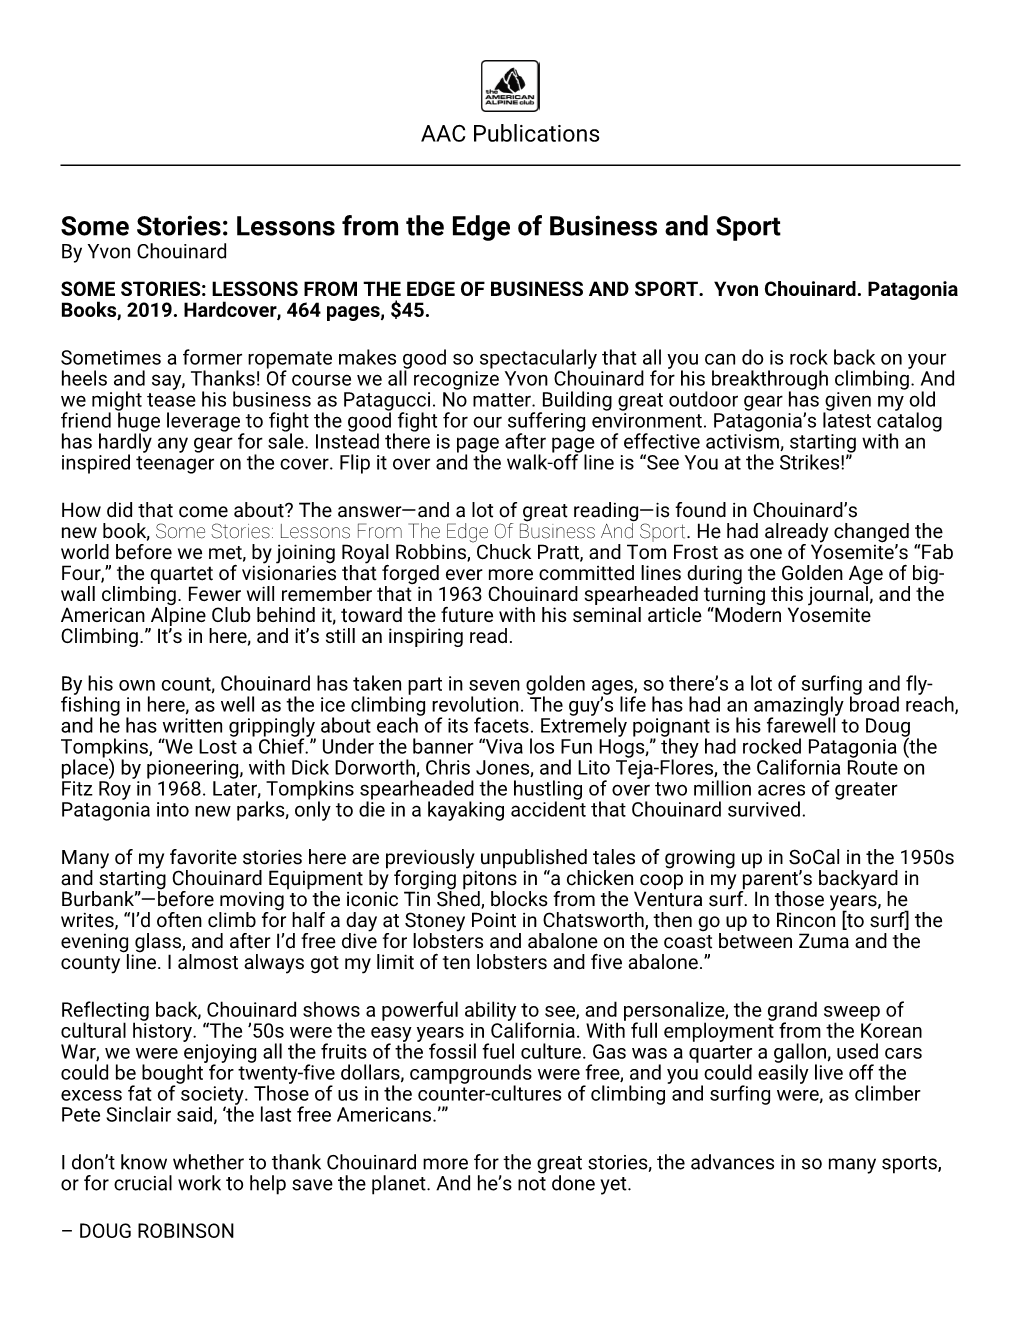 Some Stories: Lessons from the Edge of Business and Sport by Yvon Chouinard SOME STORIES: LESSONS from the EDGE of BUSINESS and SPORT